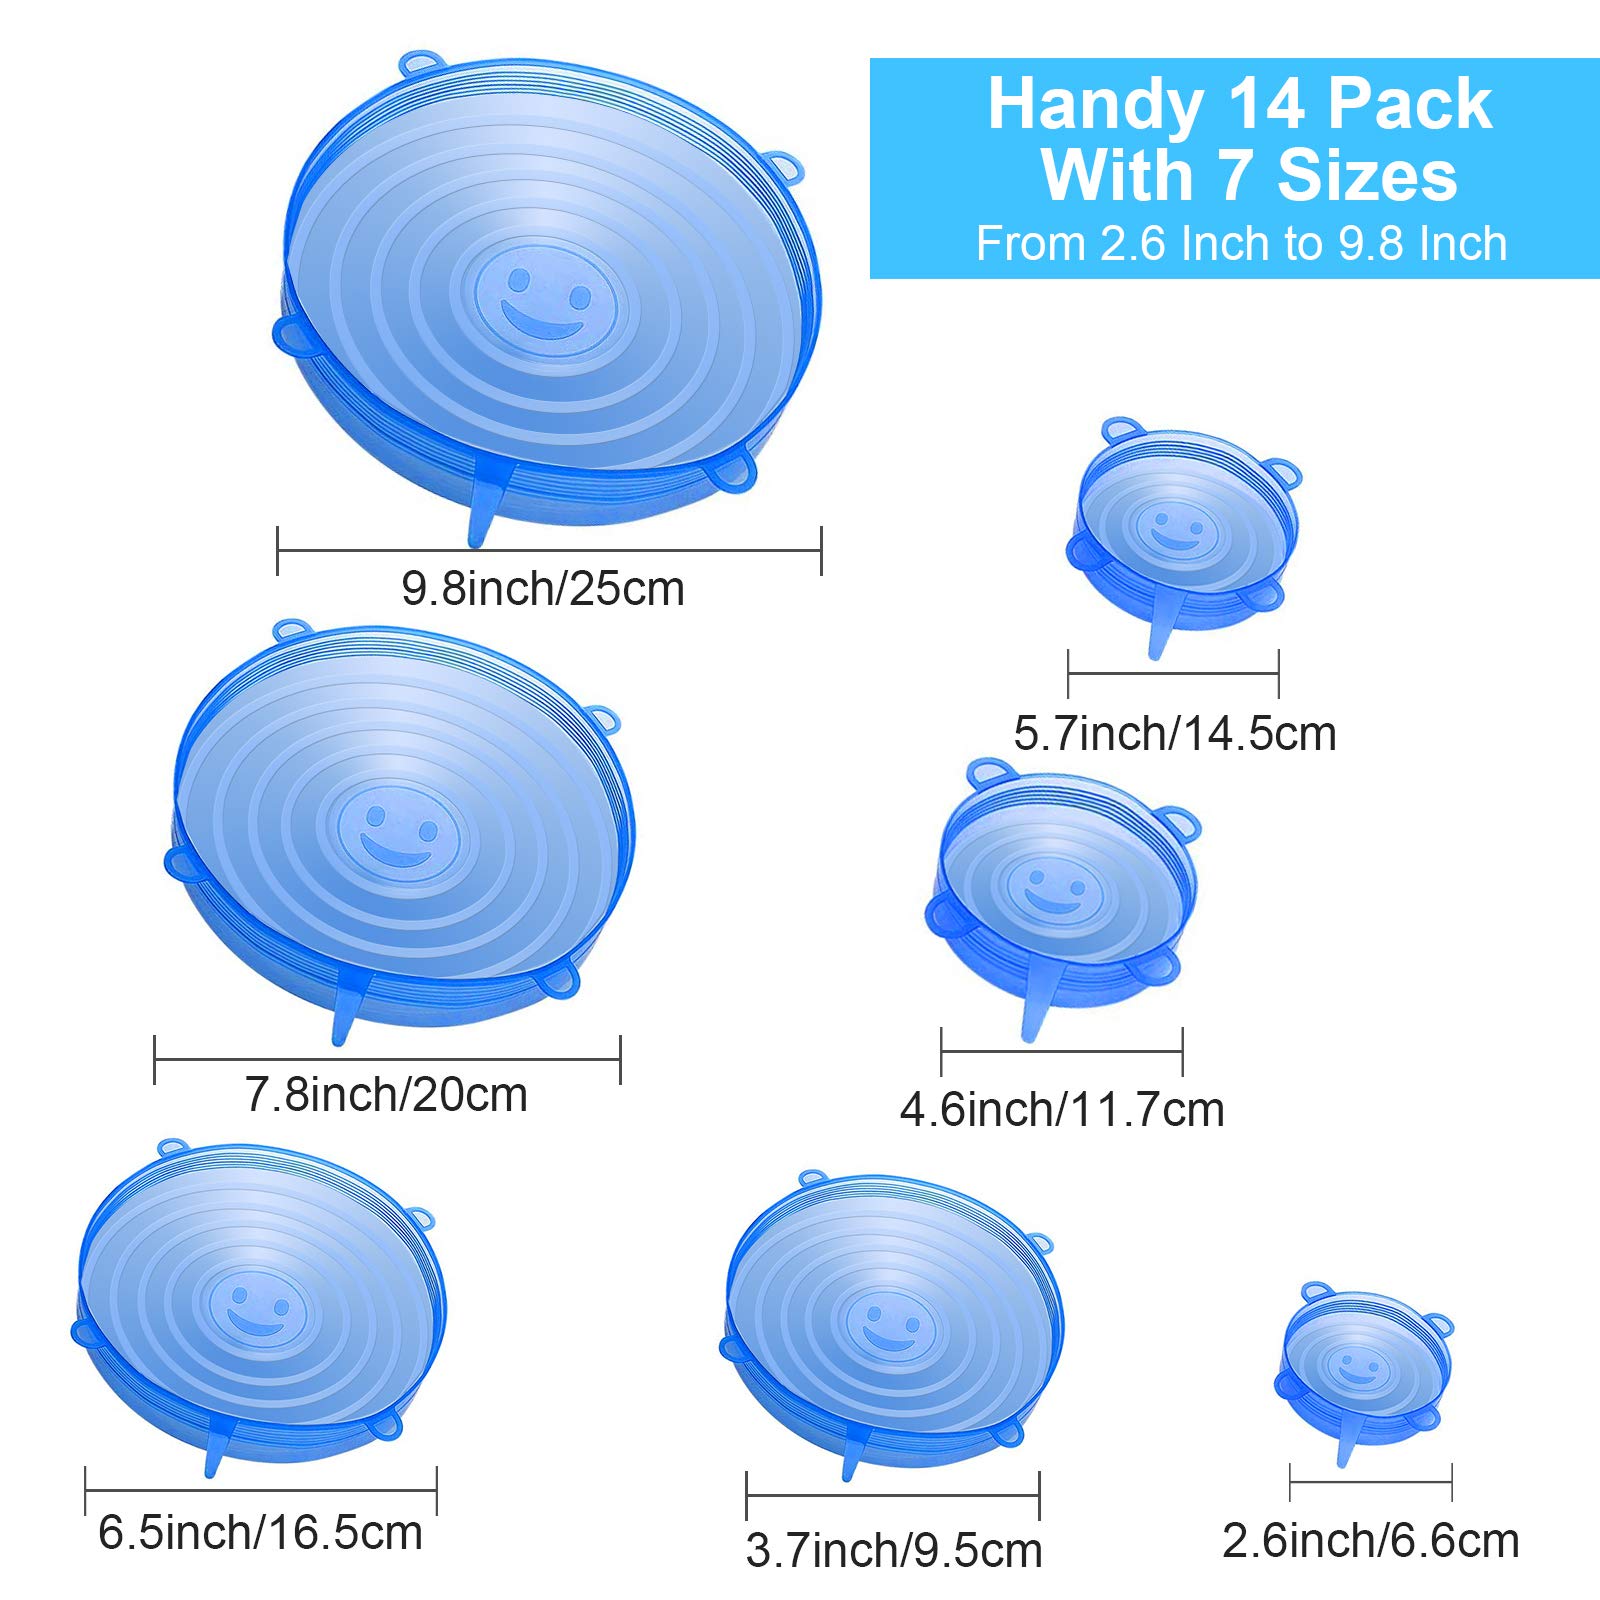 Reusable Premium Silicone Stretch and Seal Lids 14PCS for Food Storage, Flexible Round Silicone Bowl Covers, 7 Different Sizes - Keep Food Fresh, by YXYL